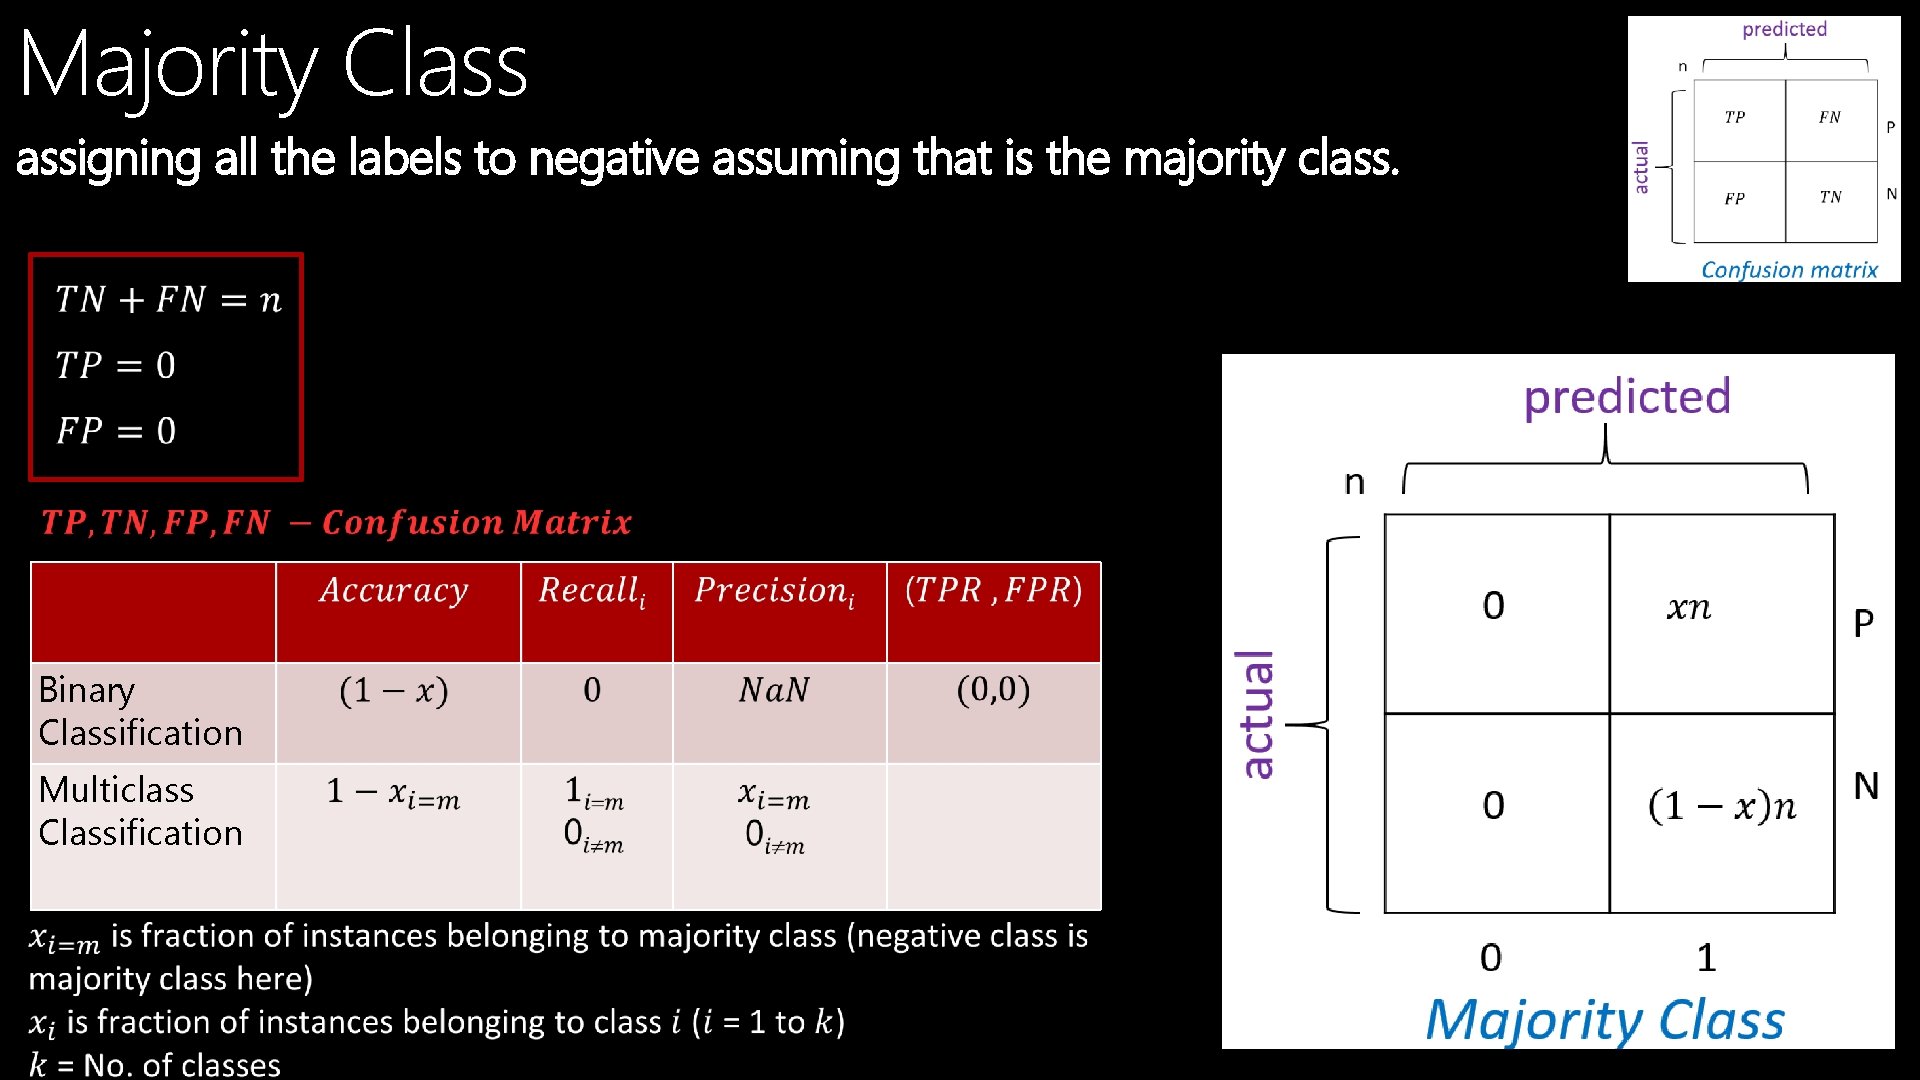 Majority Class assigning all the labels to negative assuming that is the majority class.